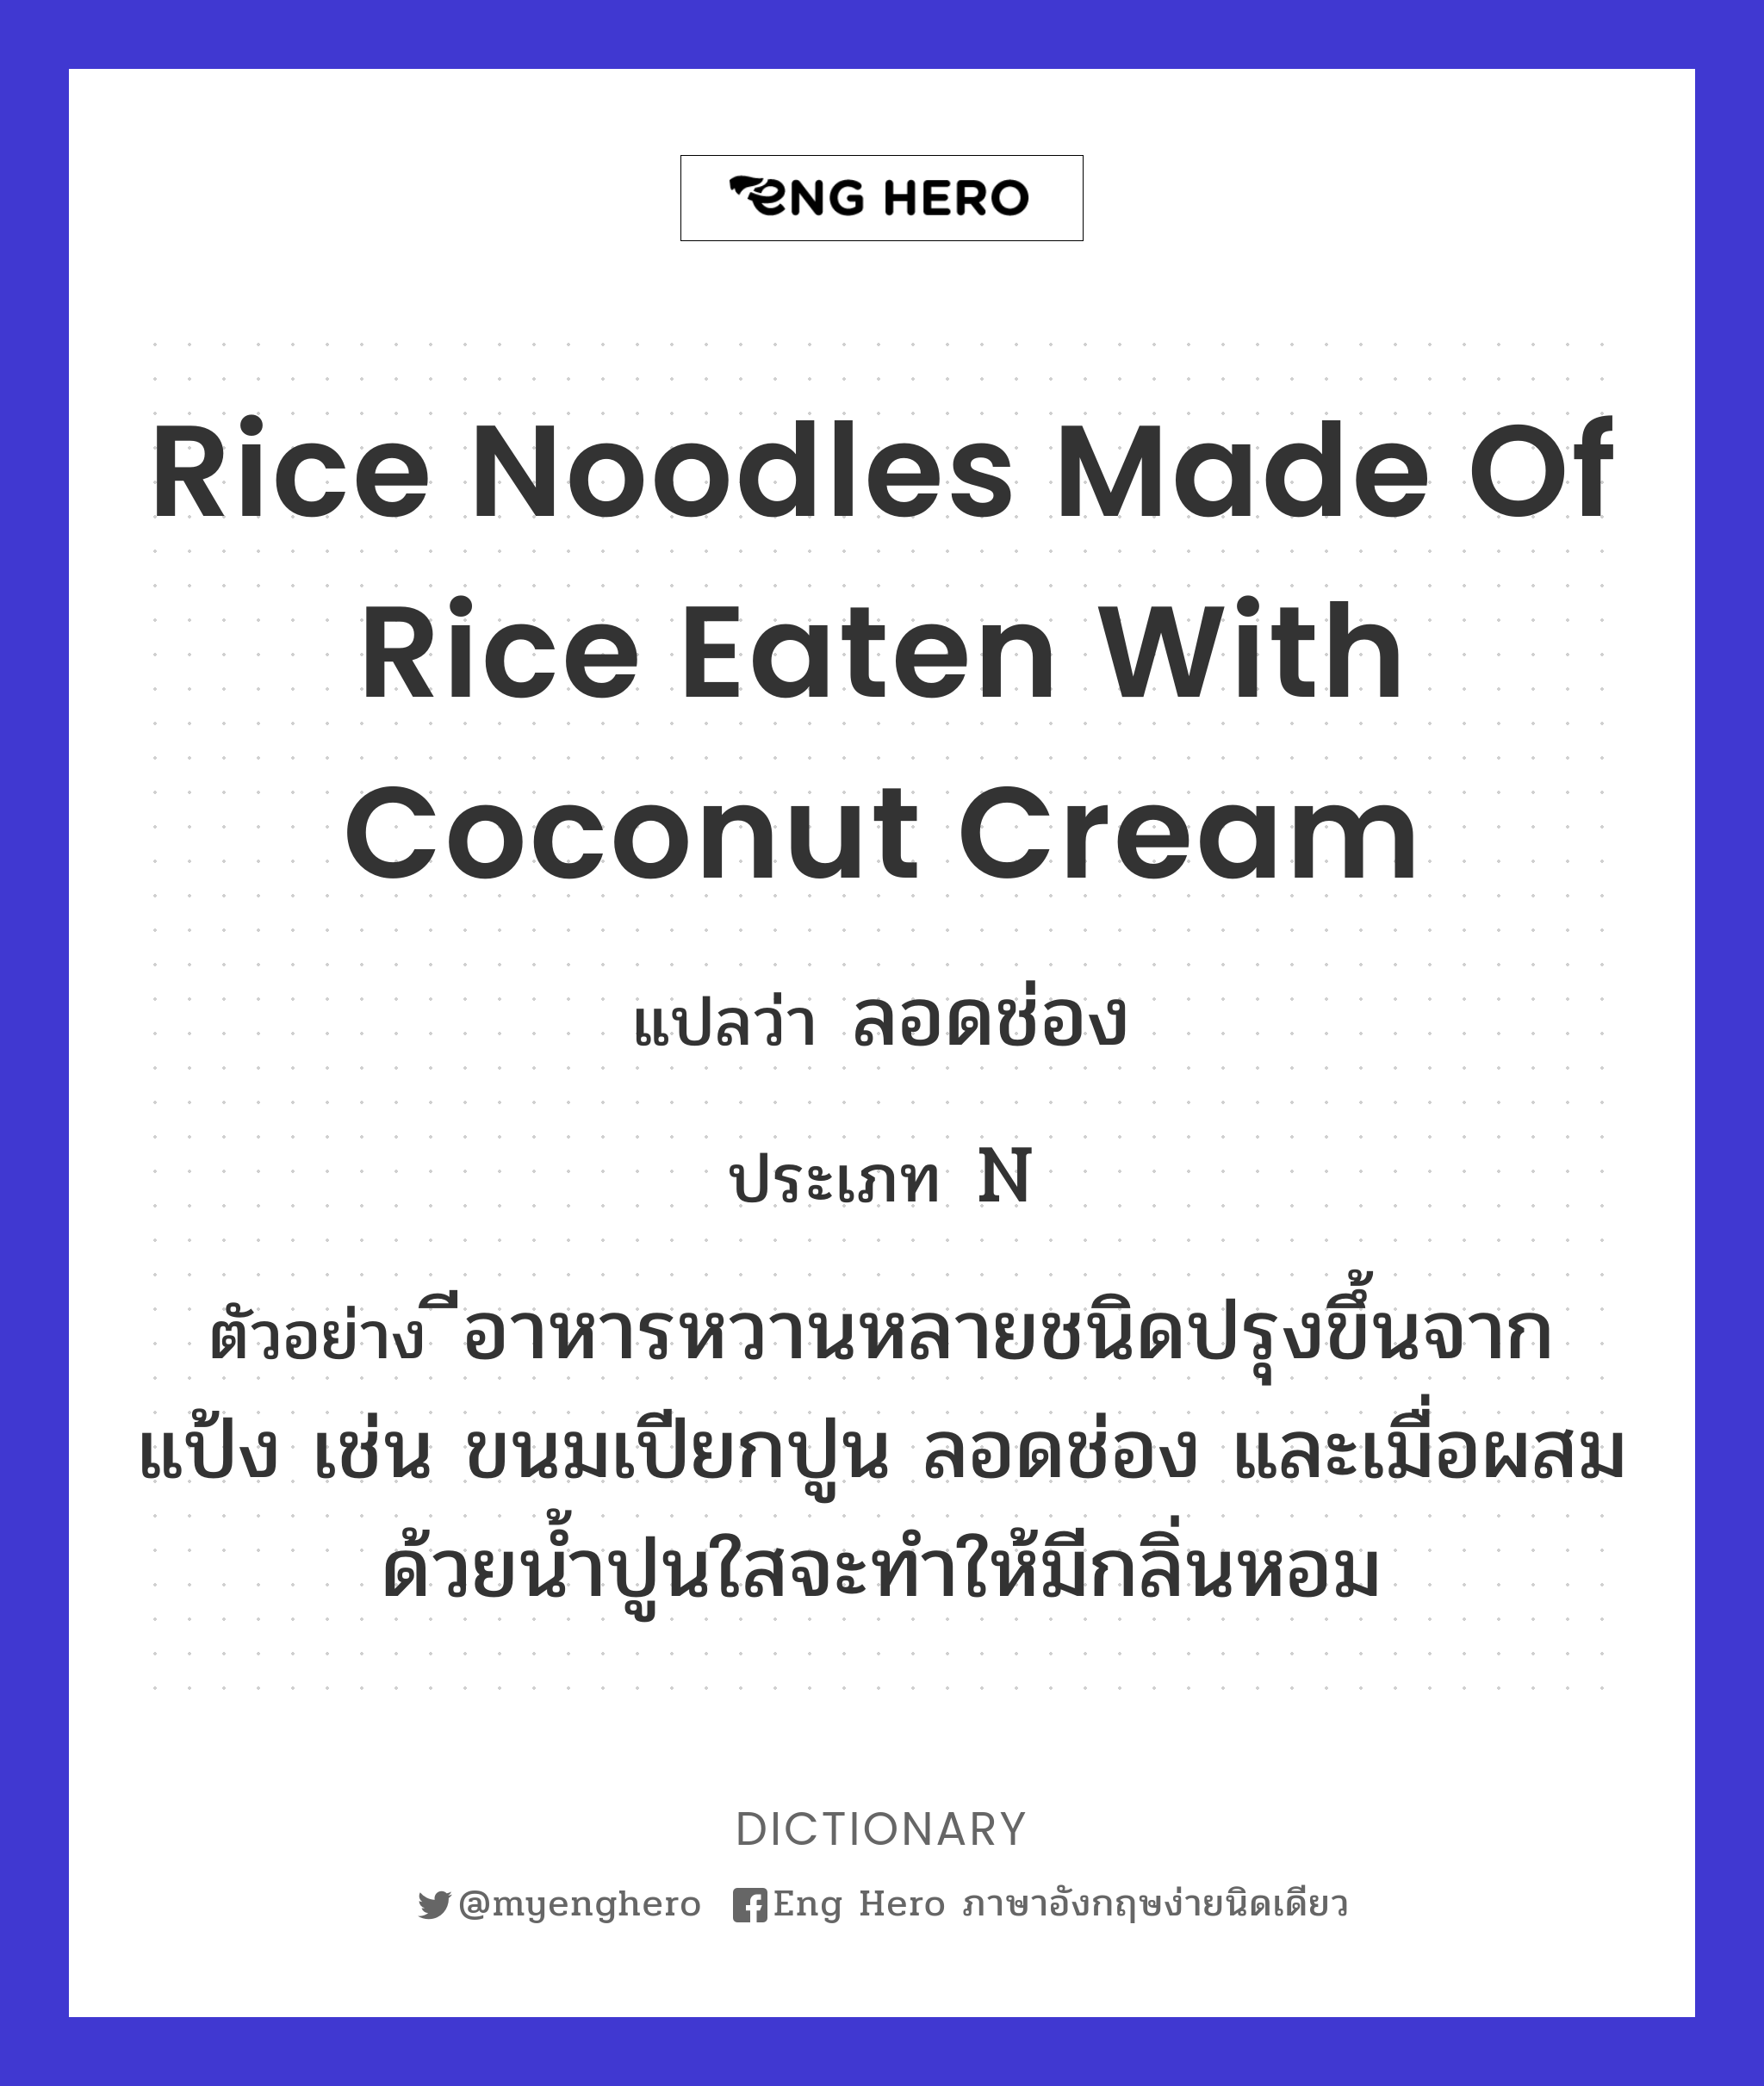 rice noodles made of rice eaten with coconut cream